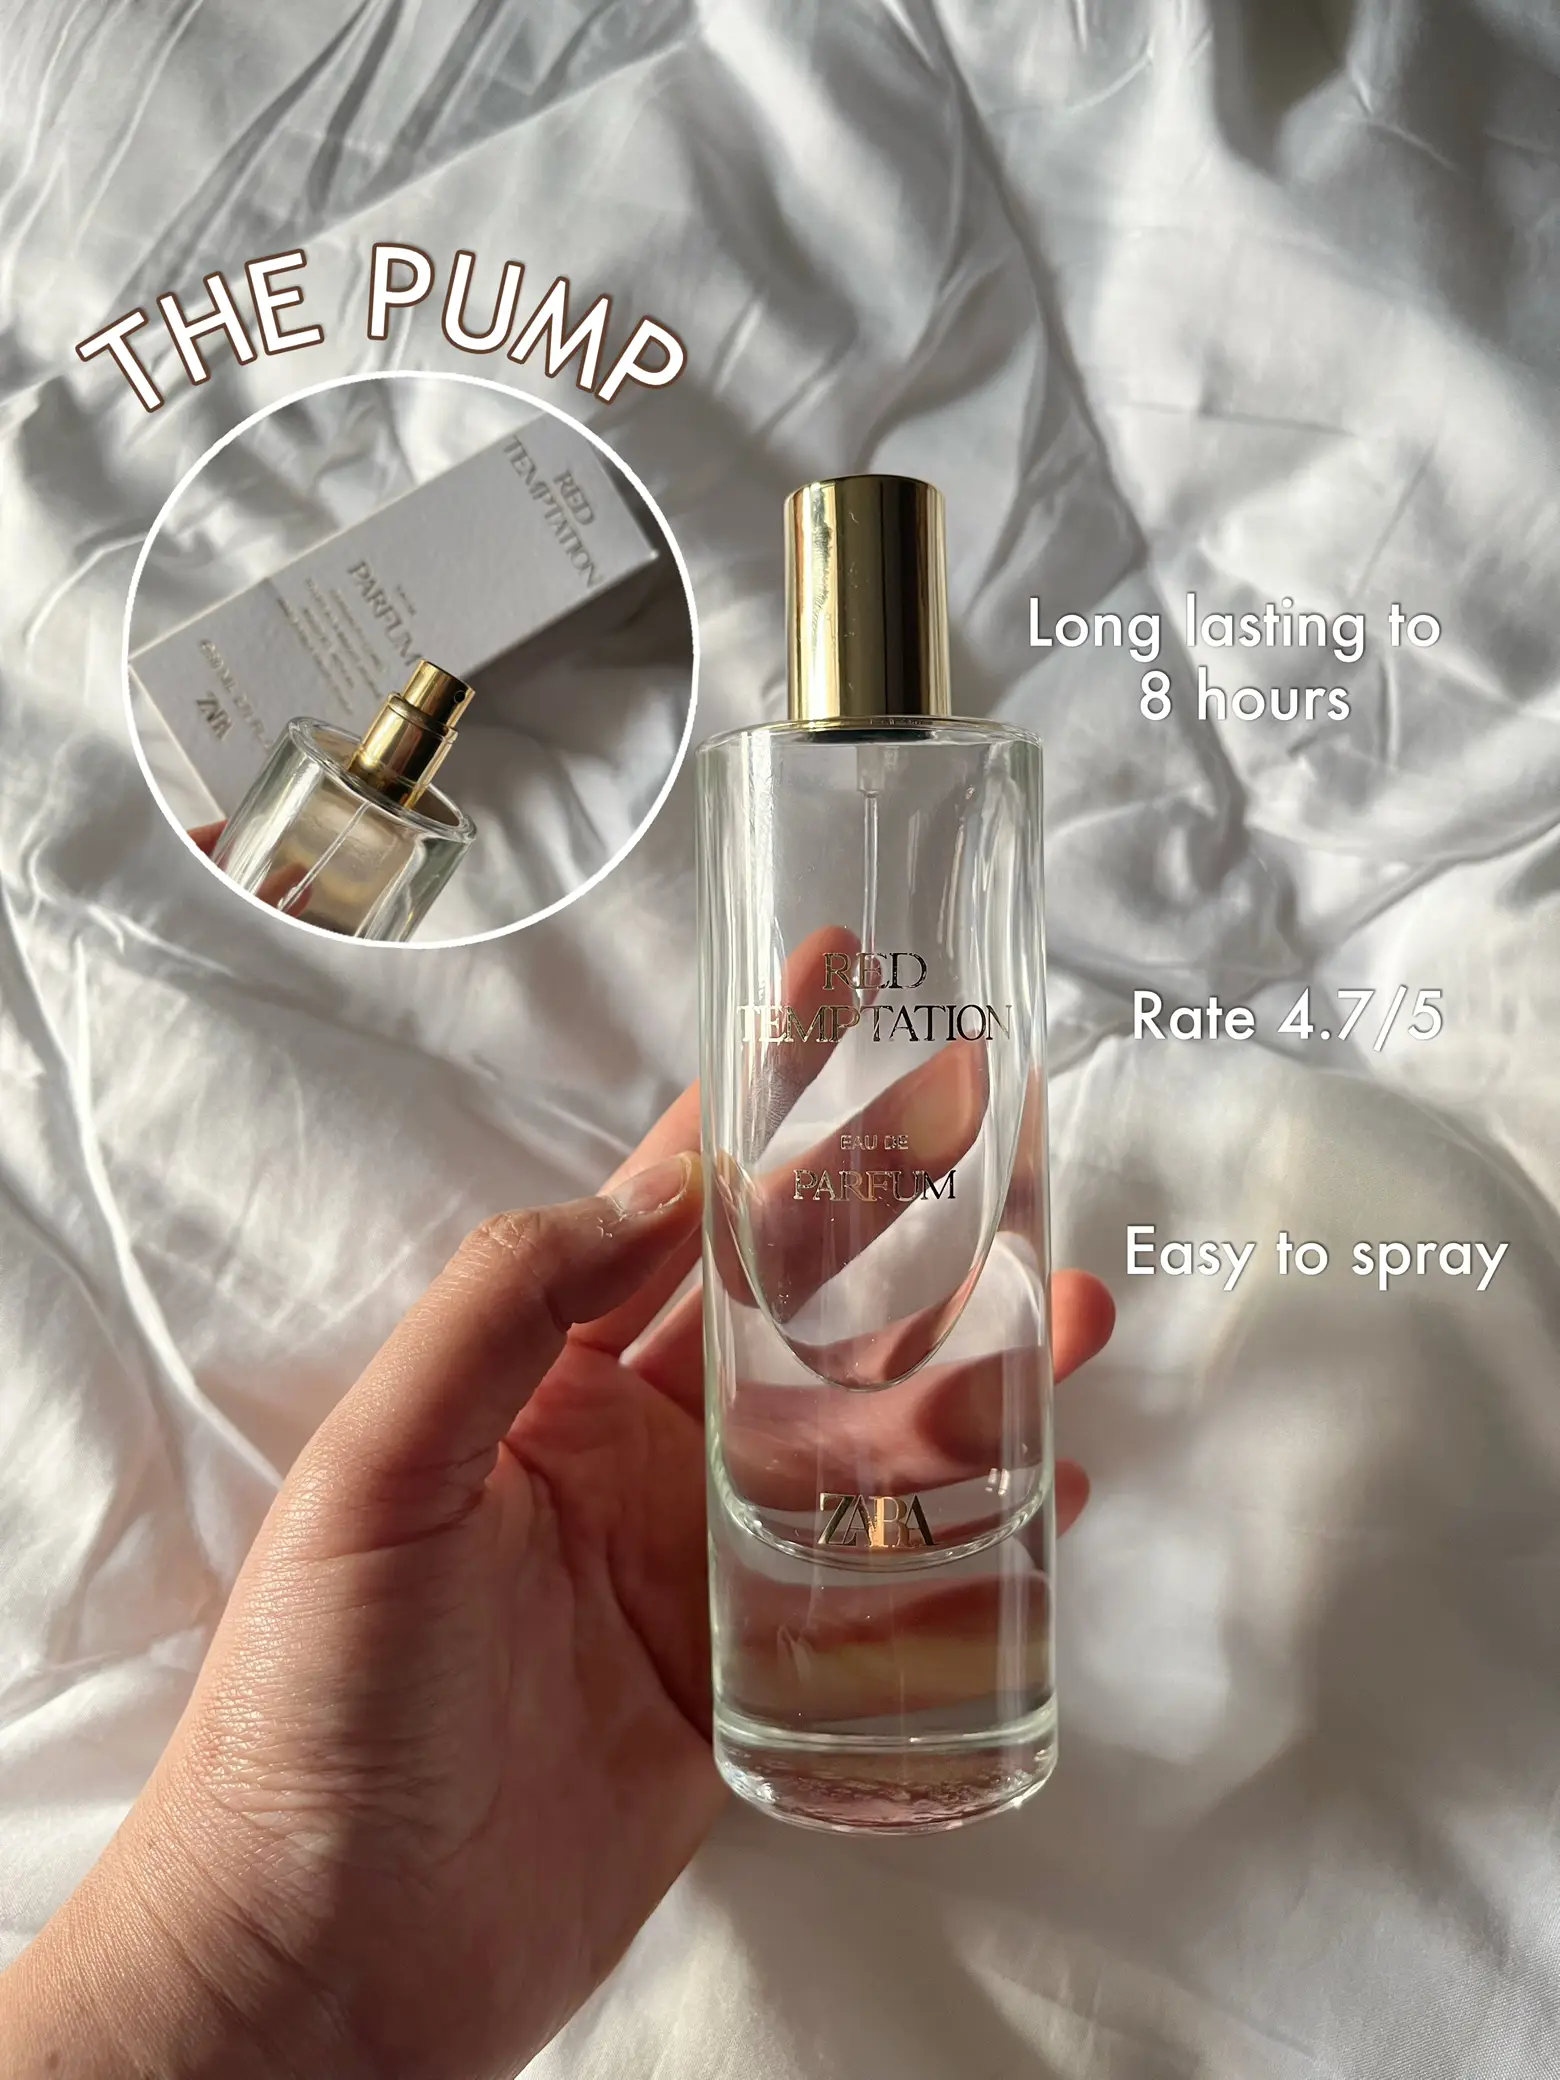 My Top Favourite Zara Perfume Dupes, Gallery posted by Hanisah